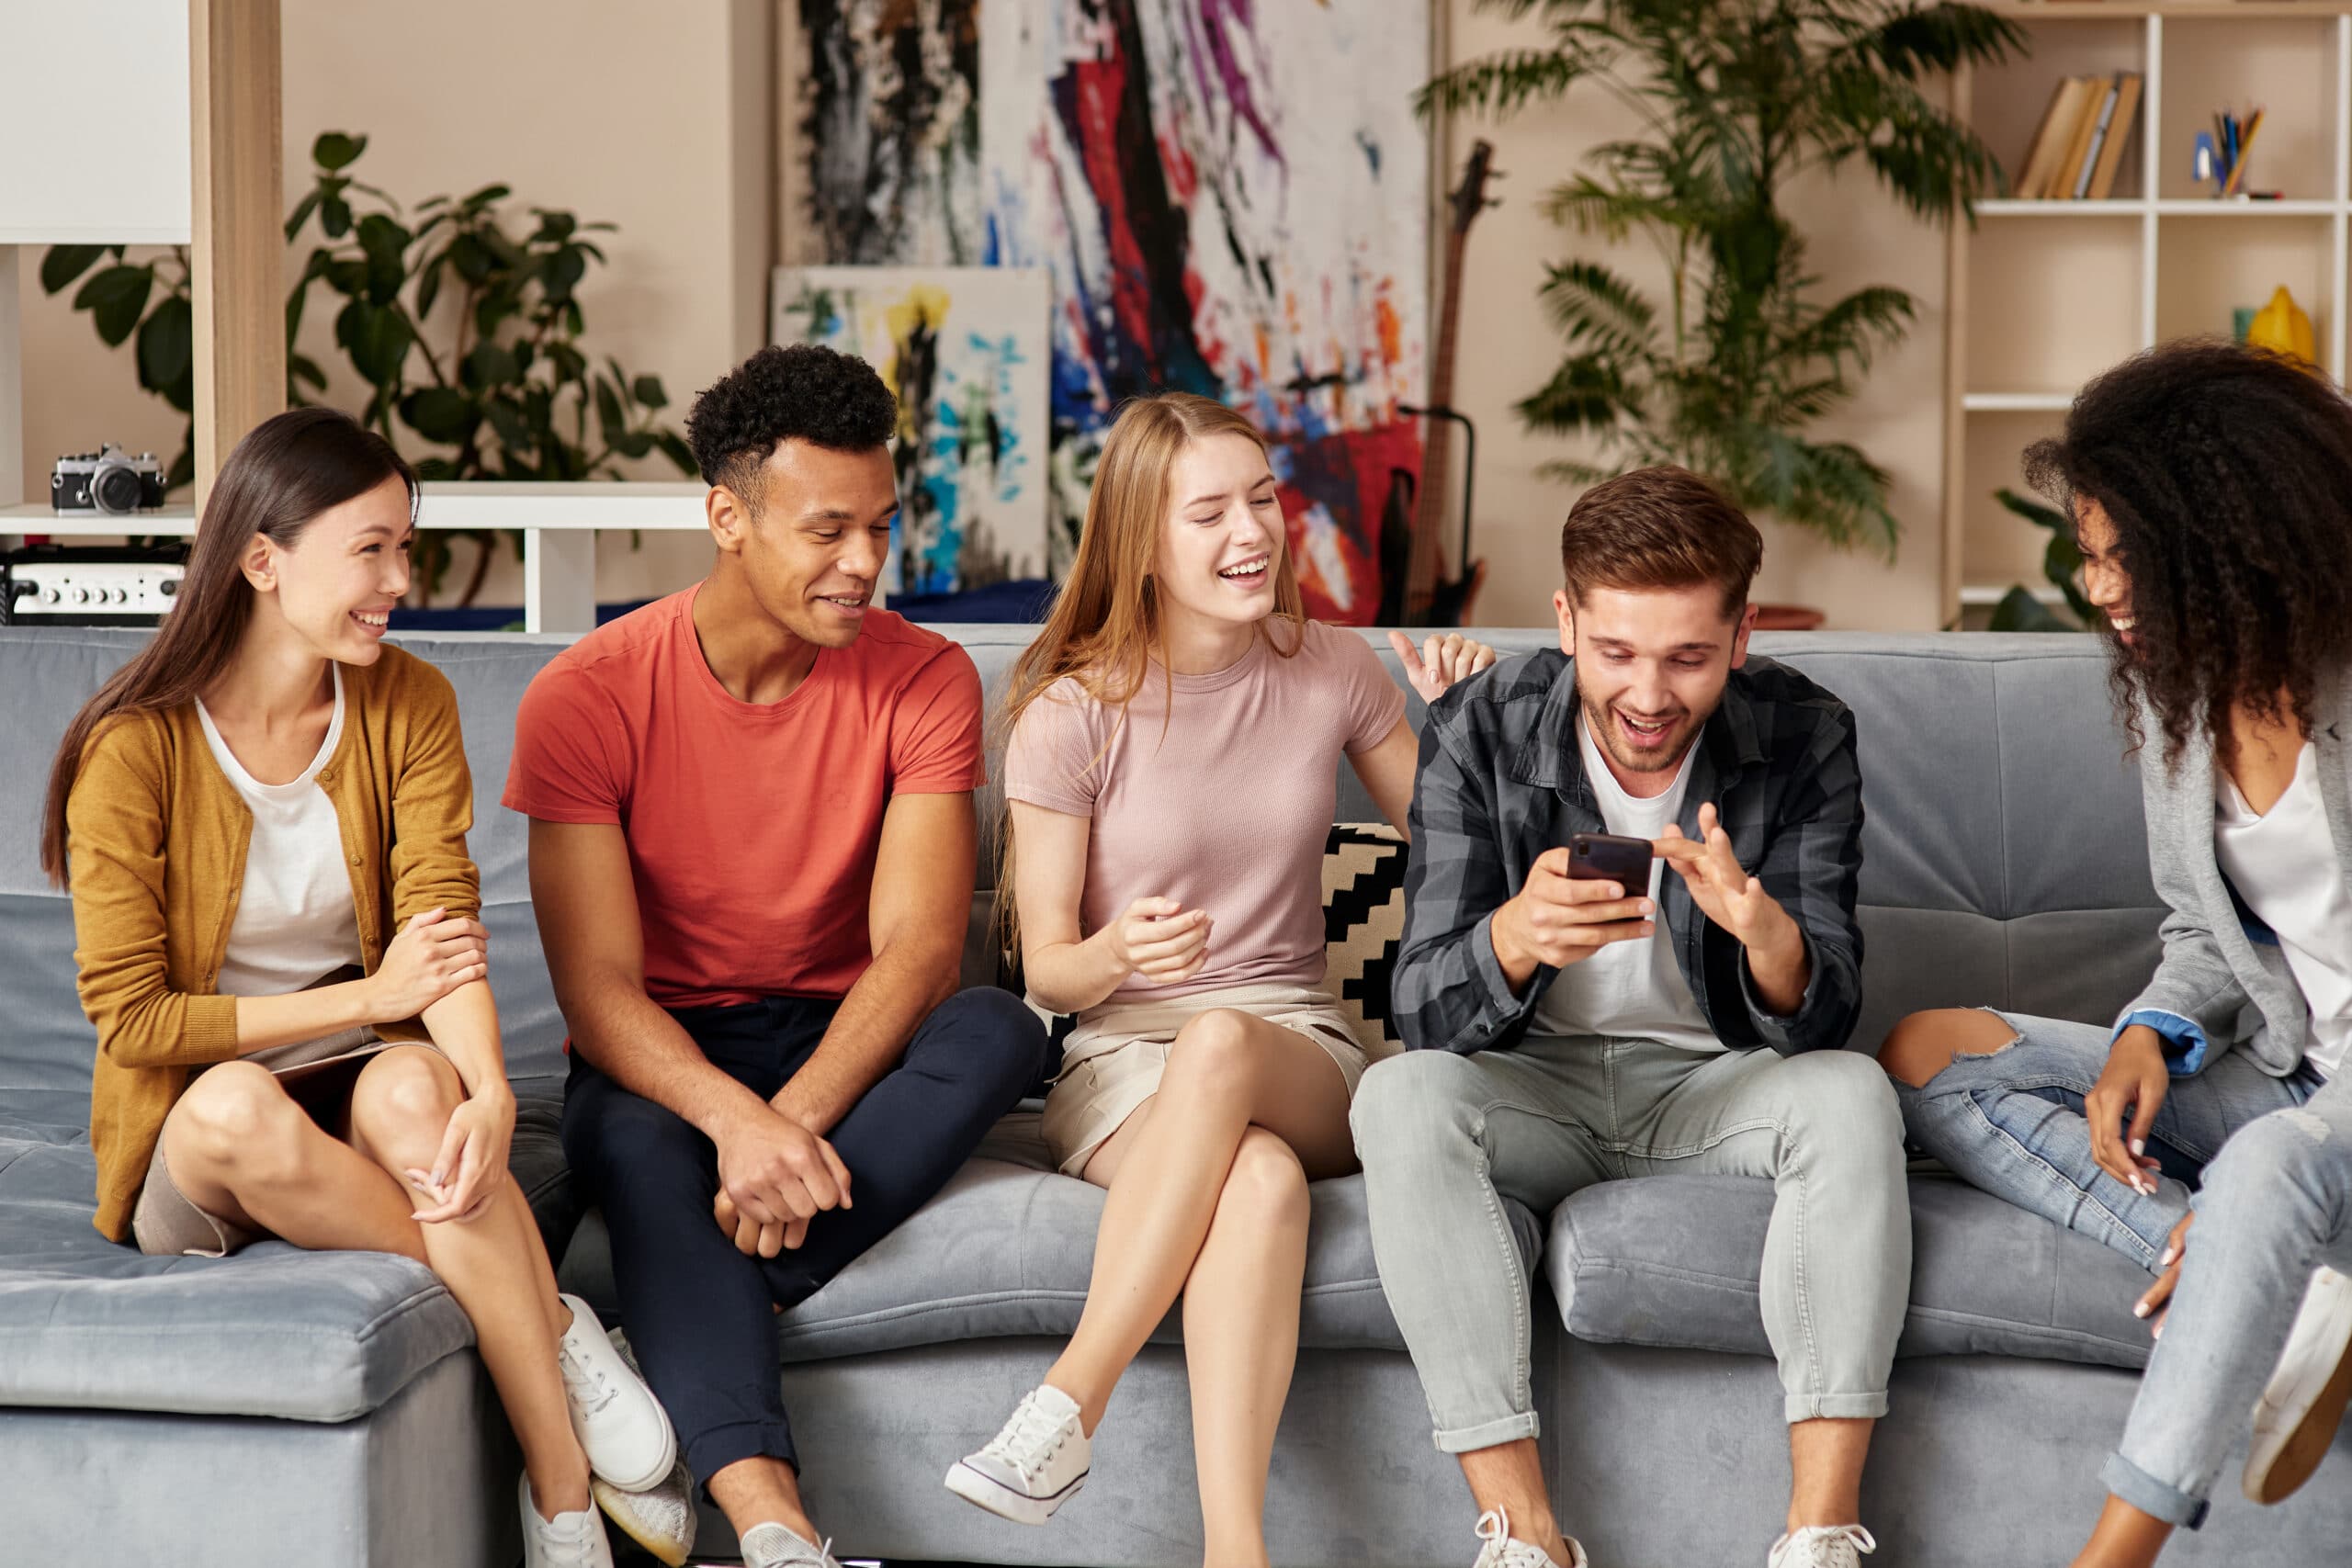 Group of happy young multicultural people in casual wear looking at smartphone, enjoying time together while sitting on the sofa in the living room. Leisure concept